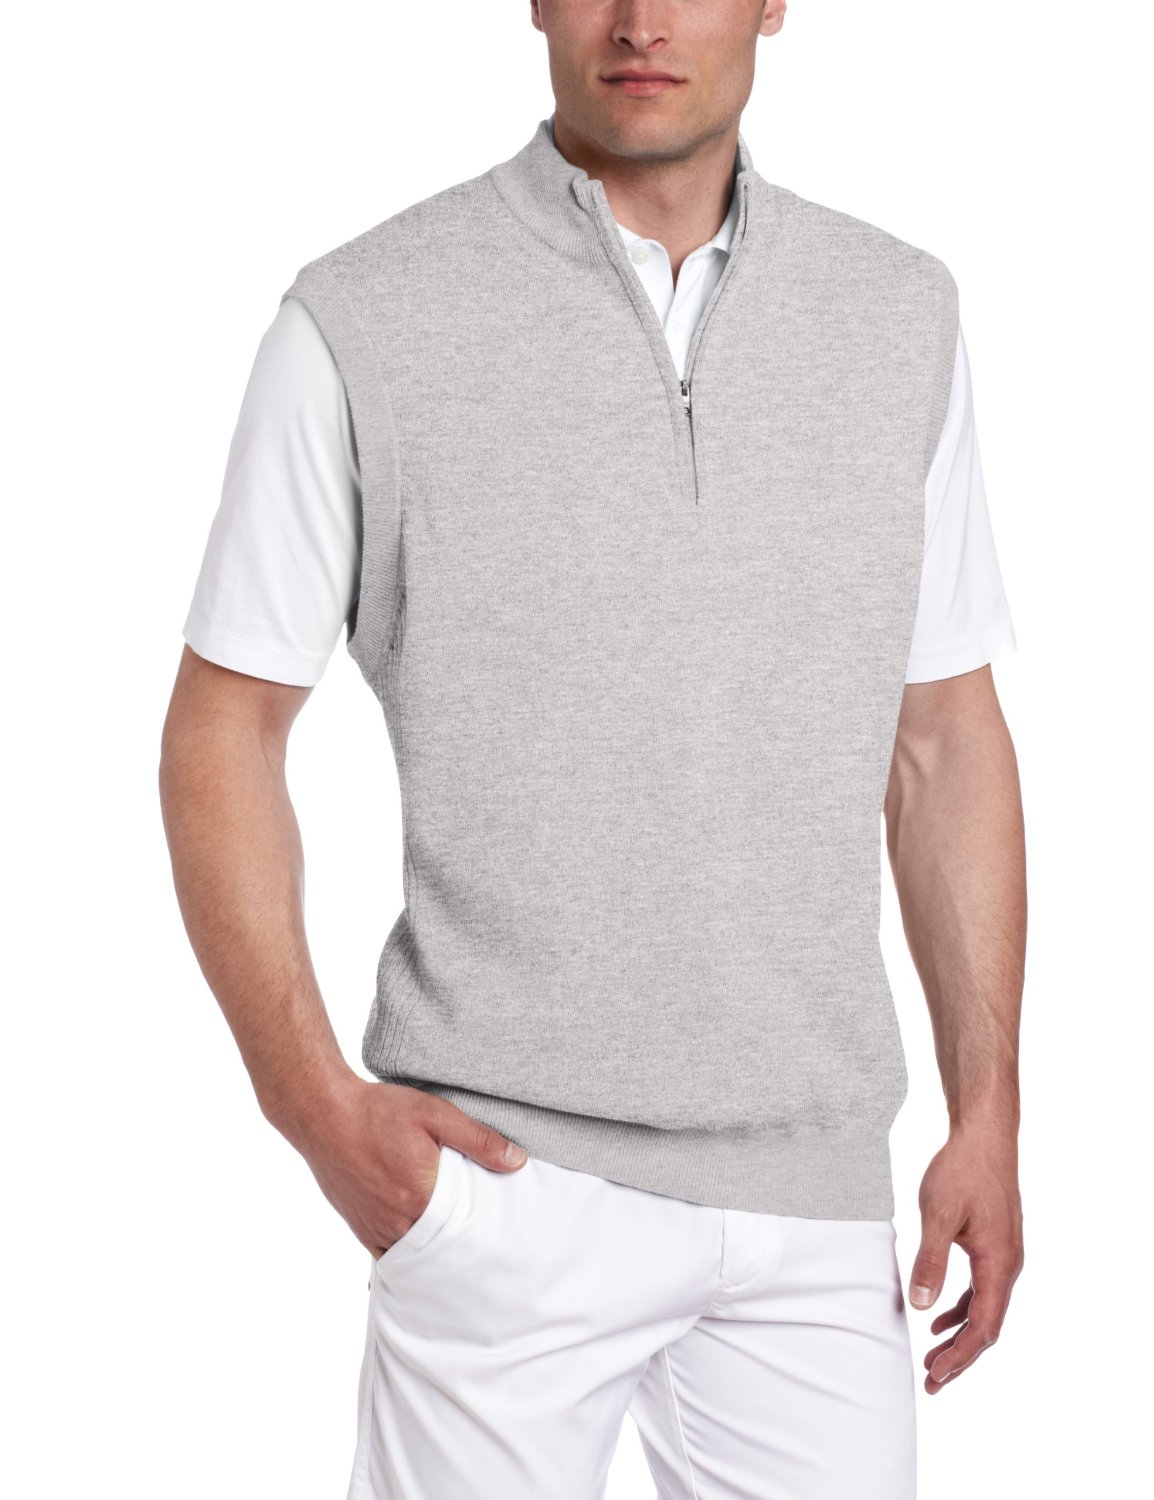 Mens Collection Lined Pima Golf Vests by Greg Norman